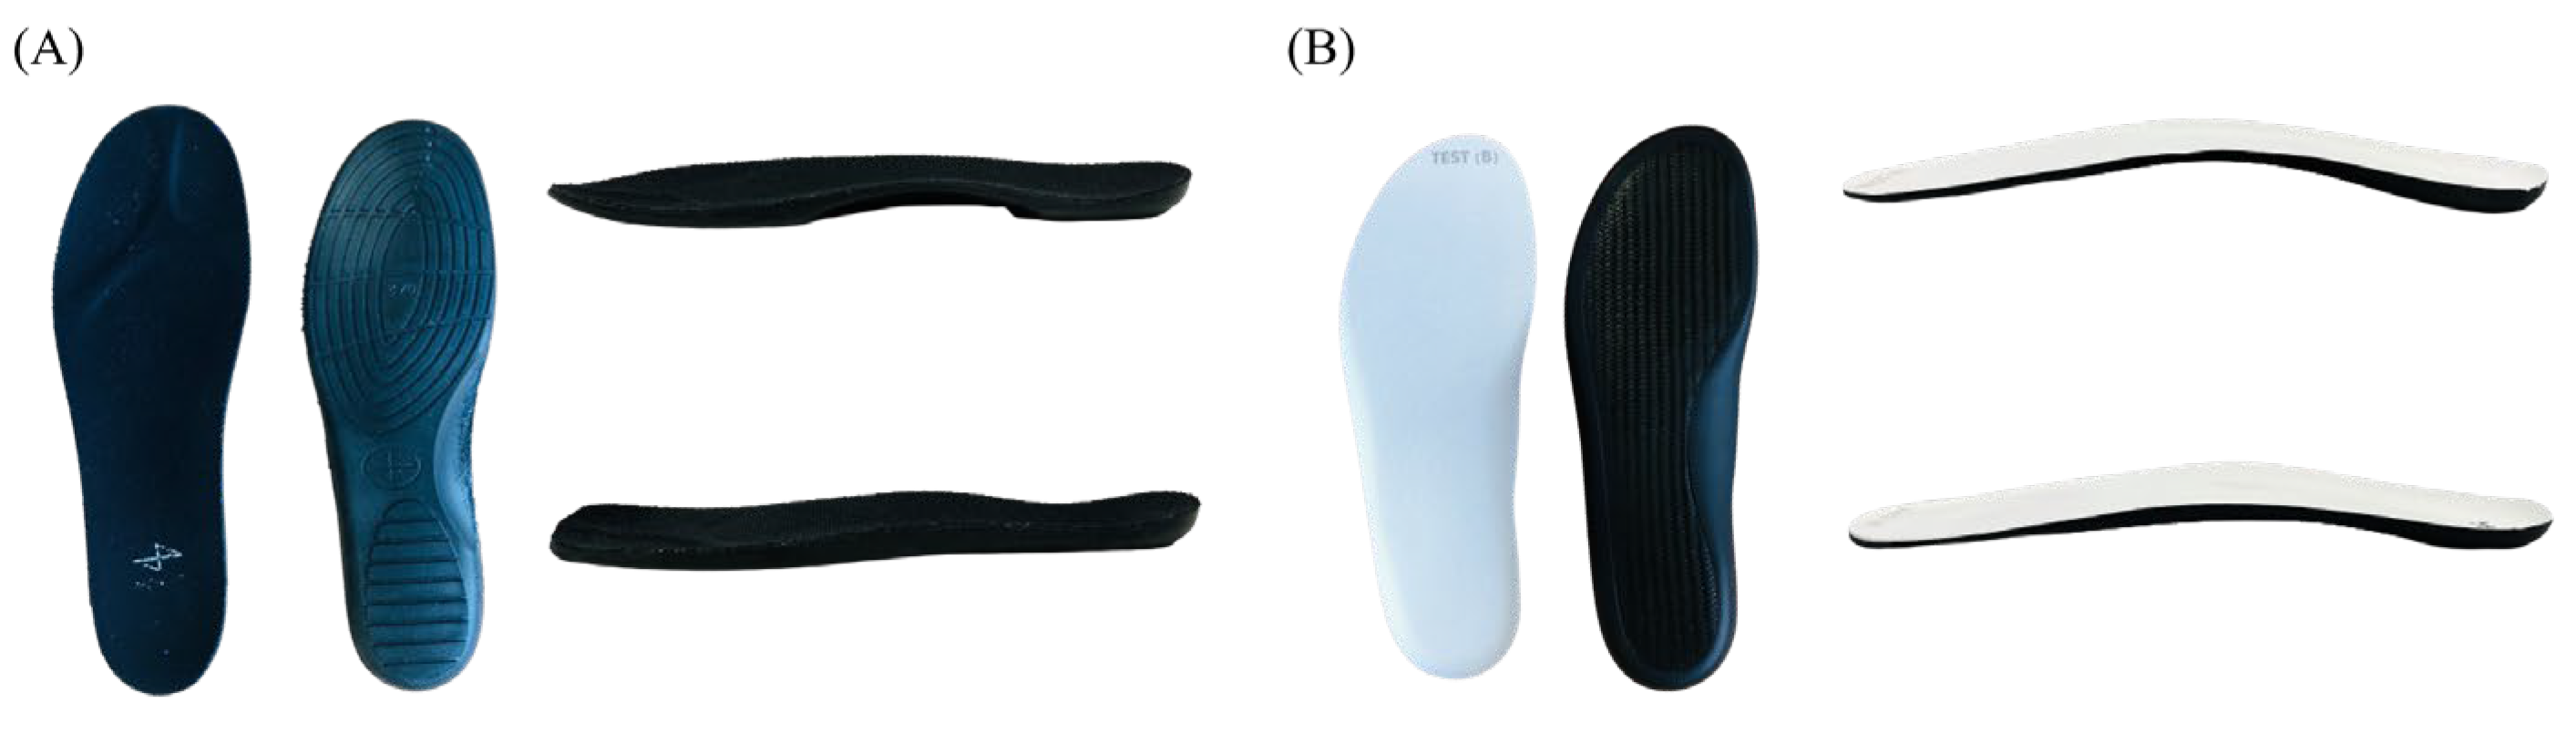 Sensors | Free Full-Text | Acute Effects of Carbon Fiber Insole on Three  Aspects of Sports Performance, Lower Extremity Muscle Activity, and  Subjective Comfort